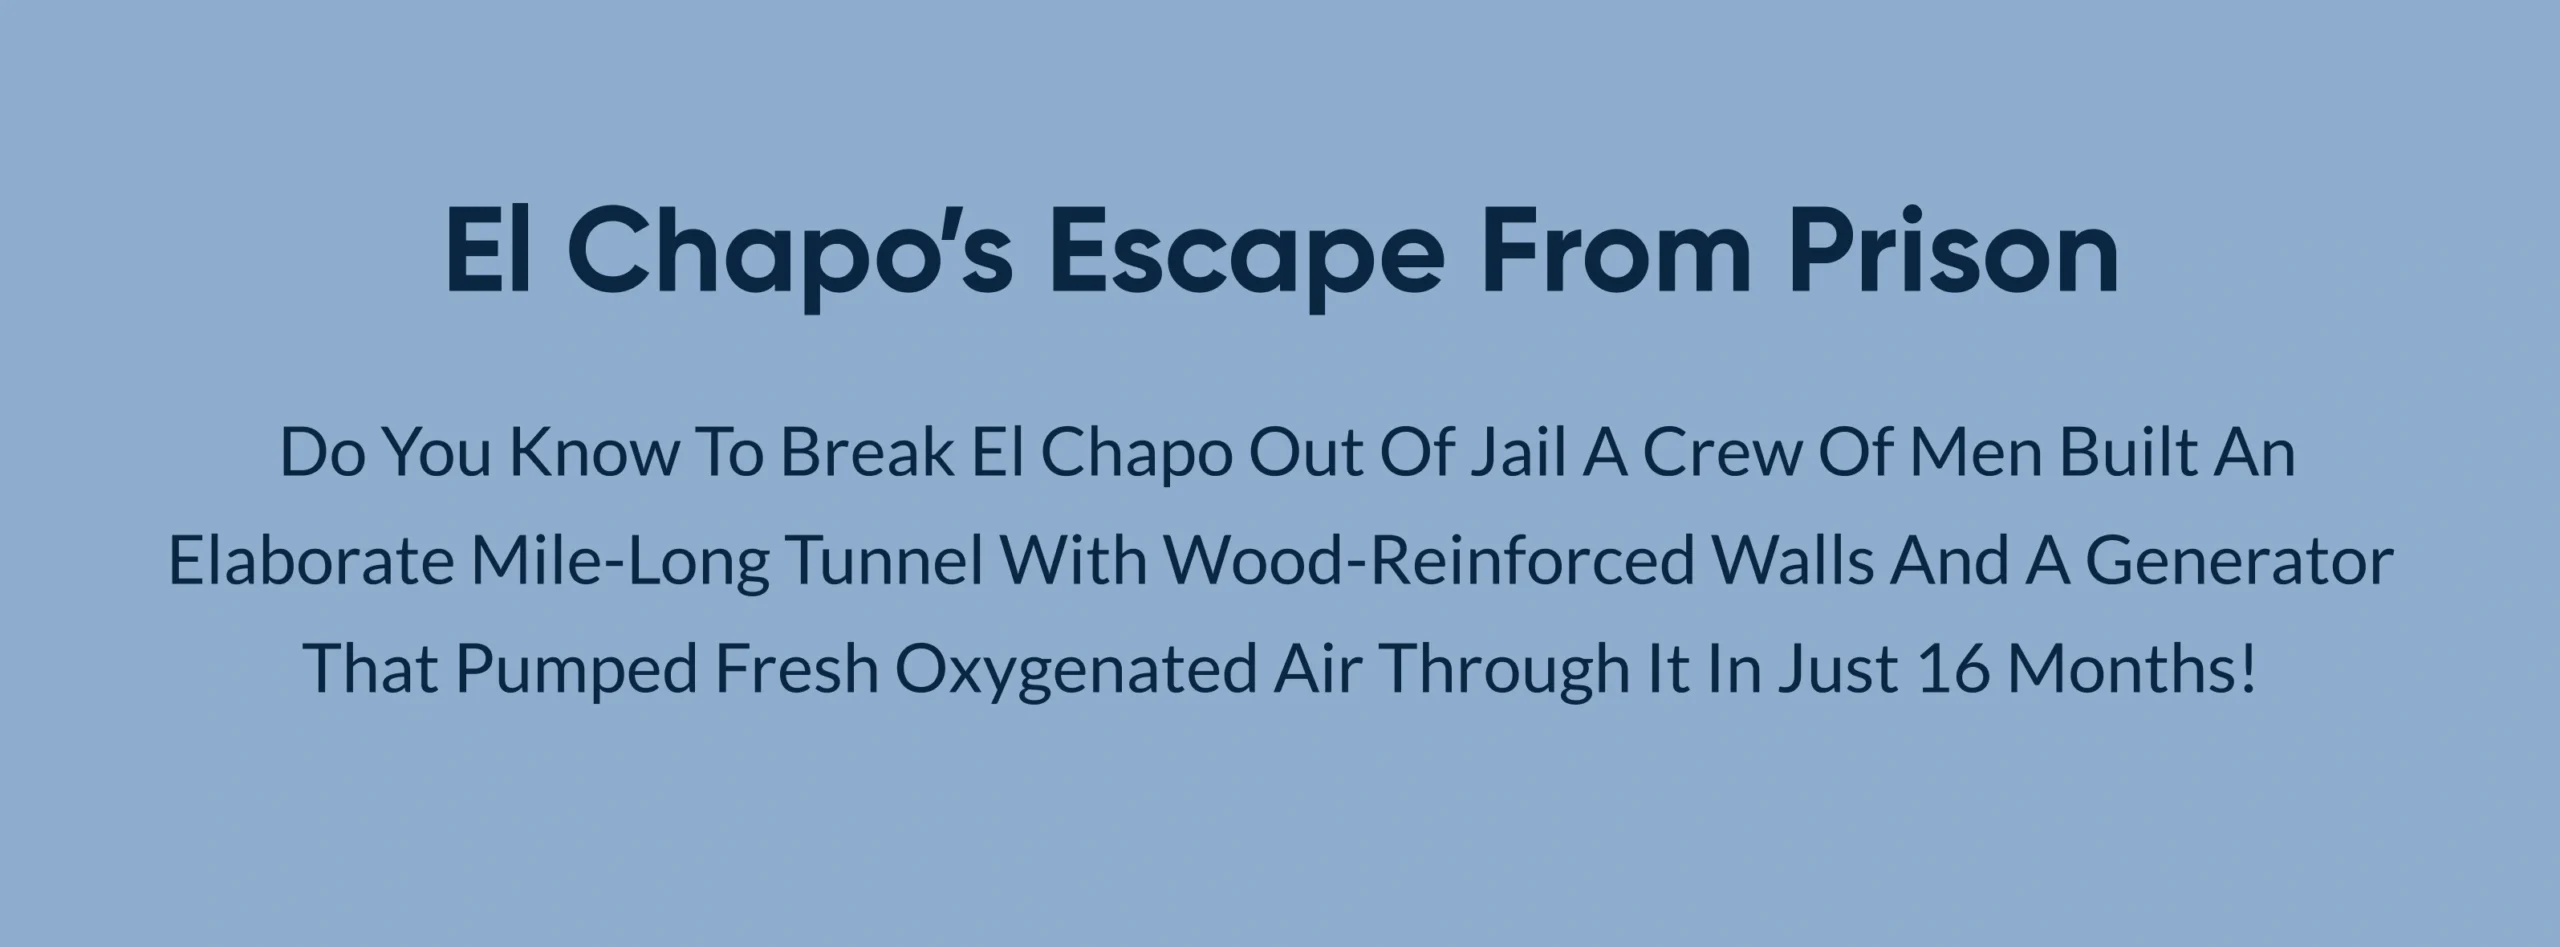 This image represents the most renowned prison escapes of El Chapo through long-miles built tunnels. 